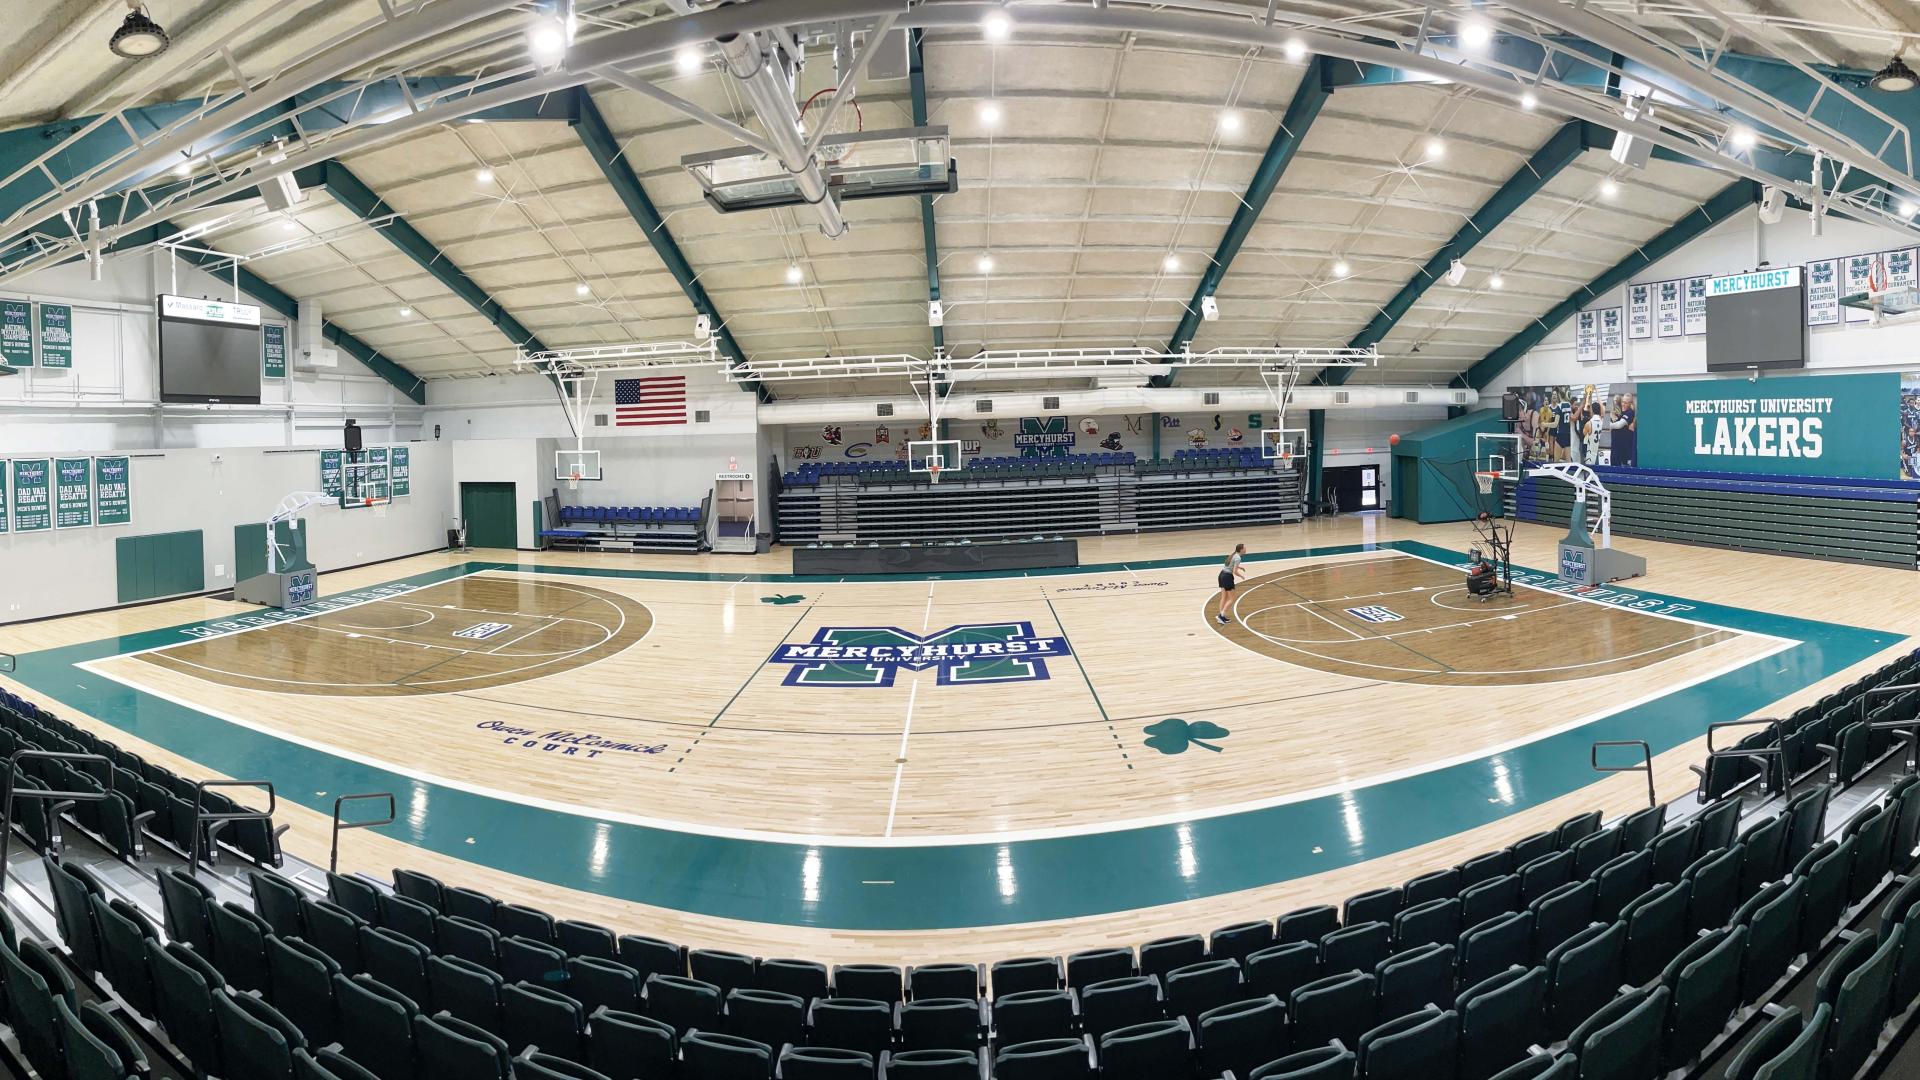 panoramic photo of the Ĳʿ athletic center